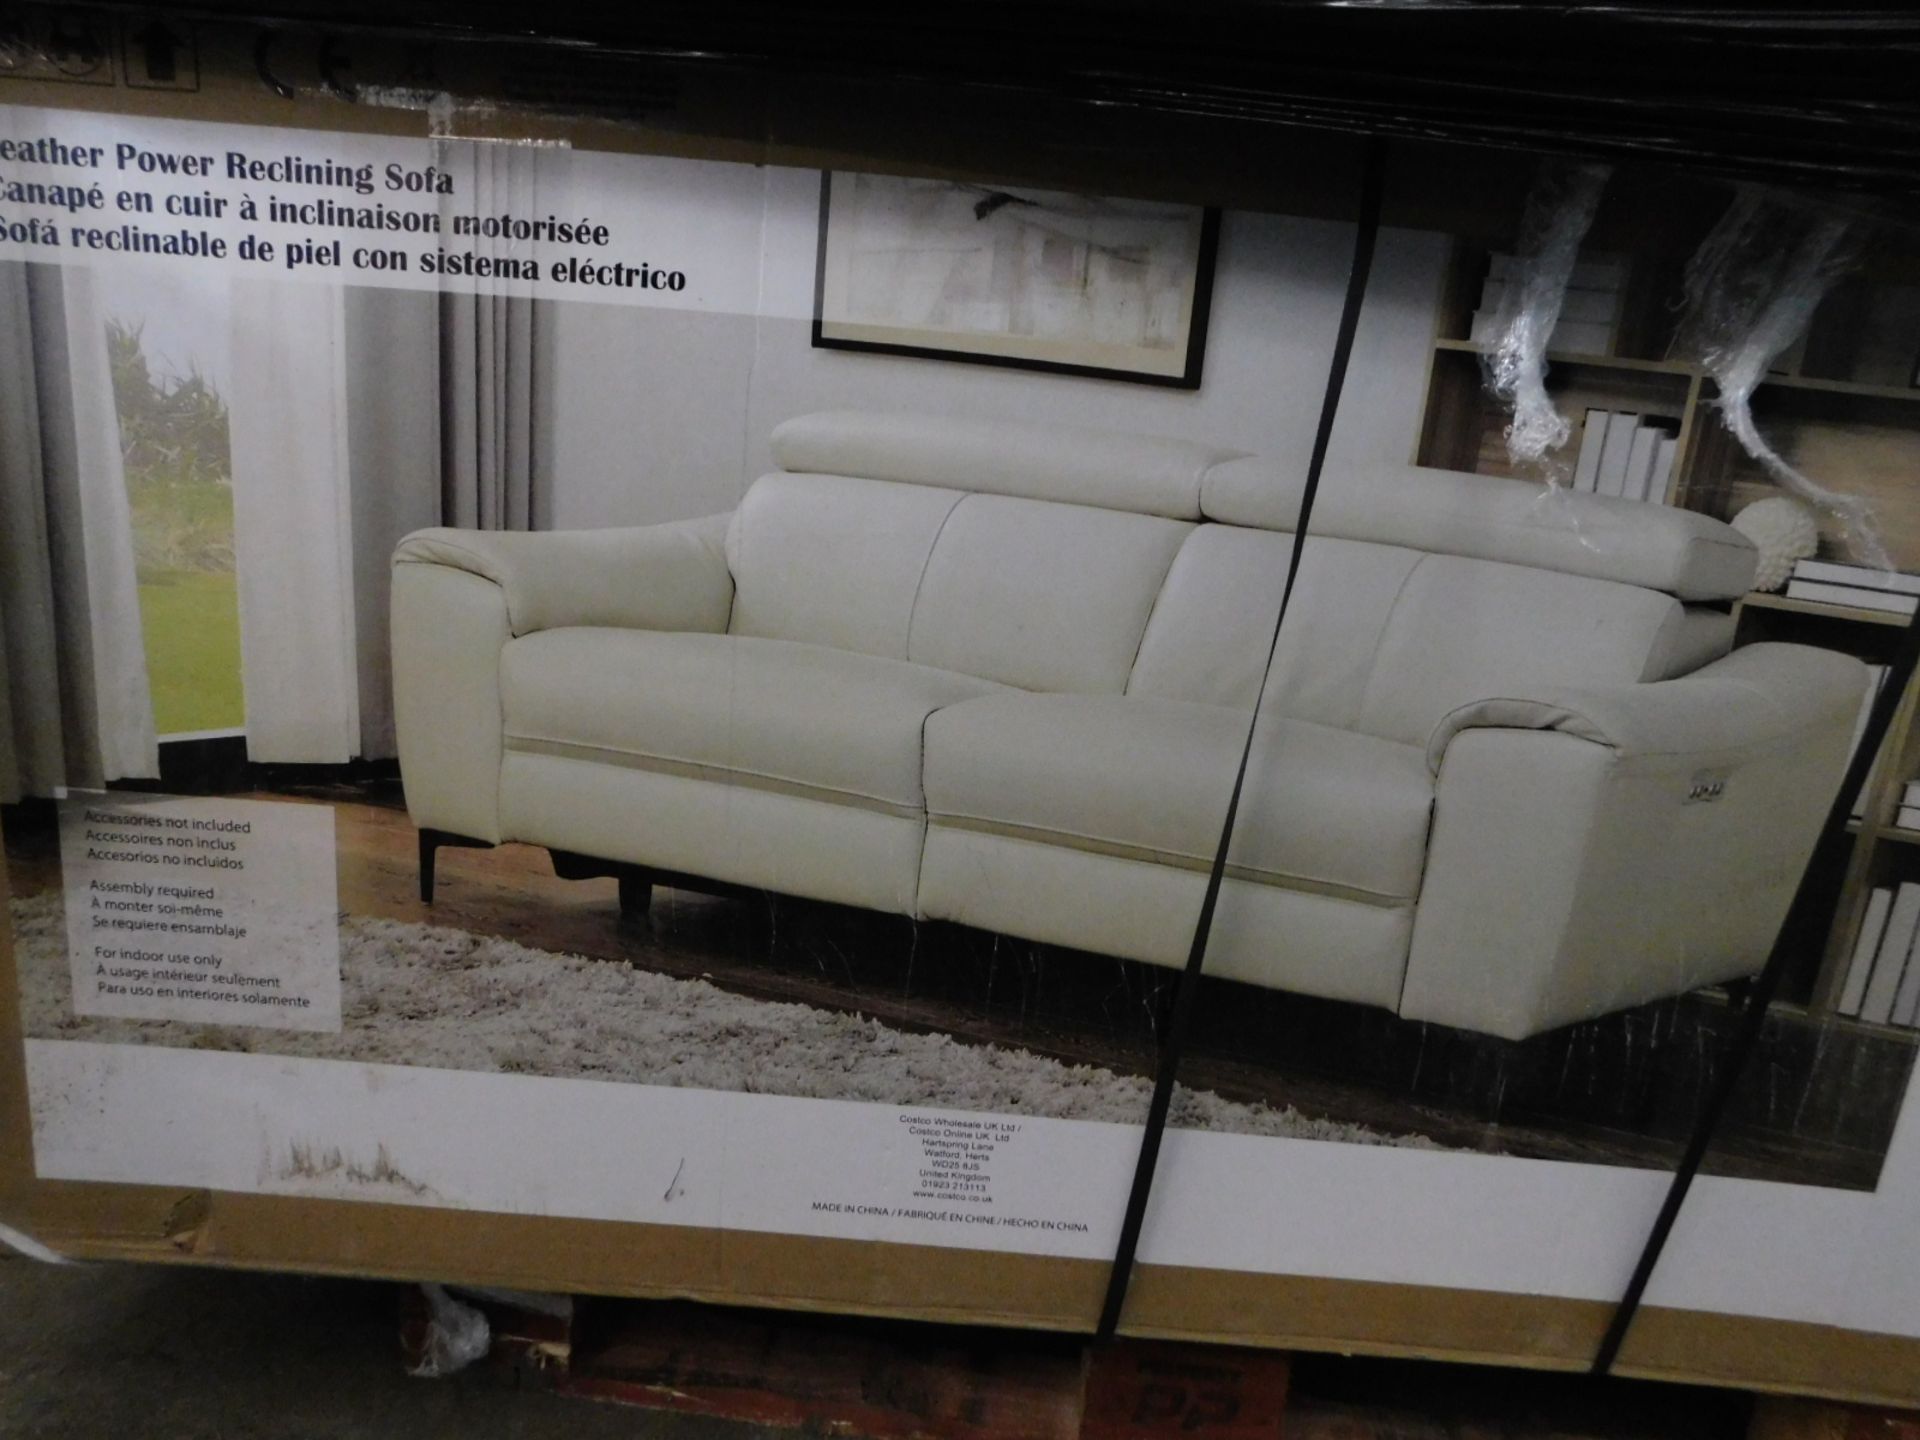 1 BOXED SOFOLOGY WHITE LEATHER 3 SEATER DOUBLE POWER RECLINER FULL BACK SOFA RRP Â£999